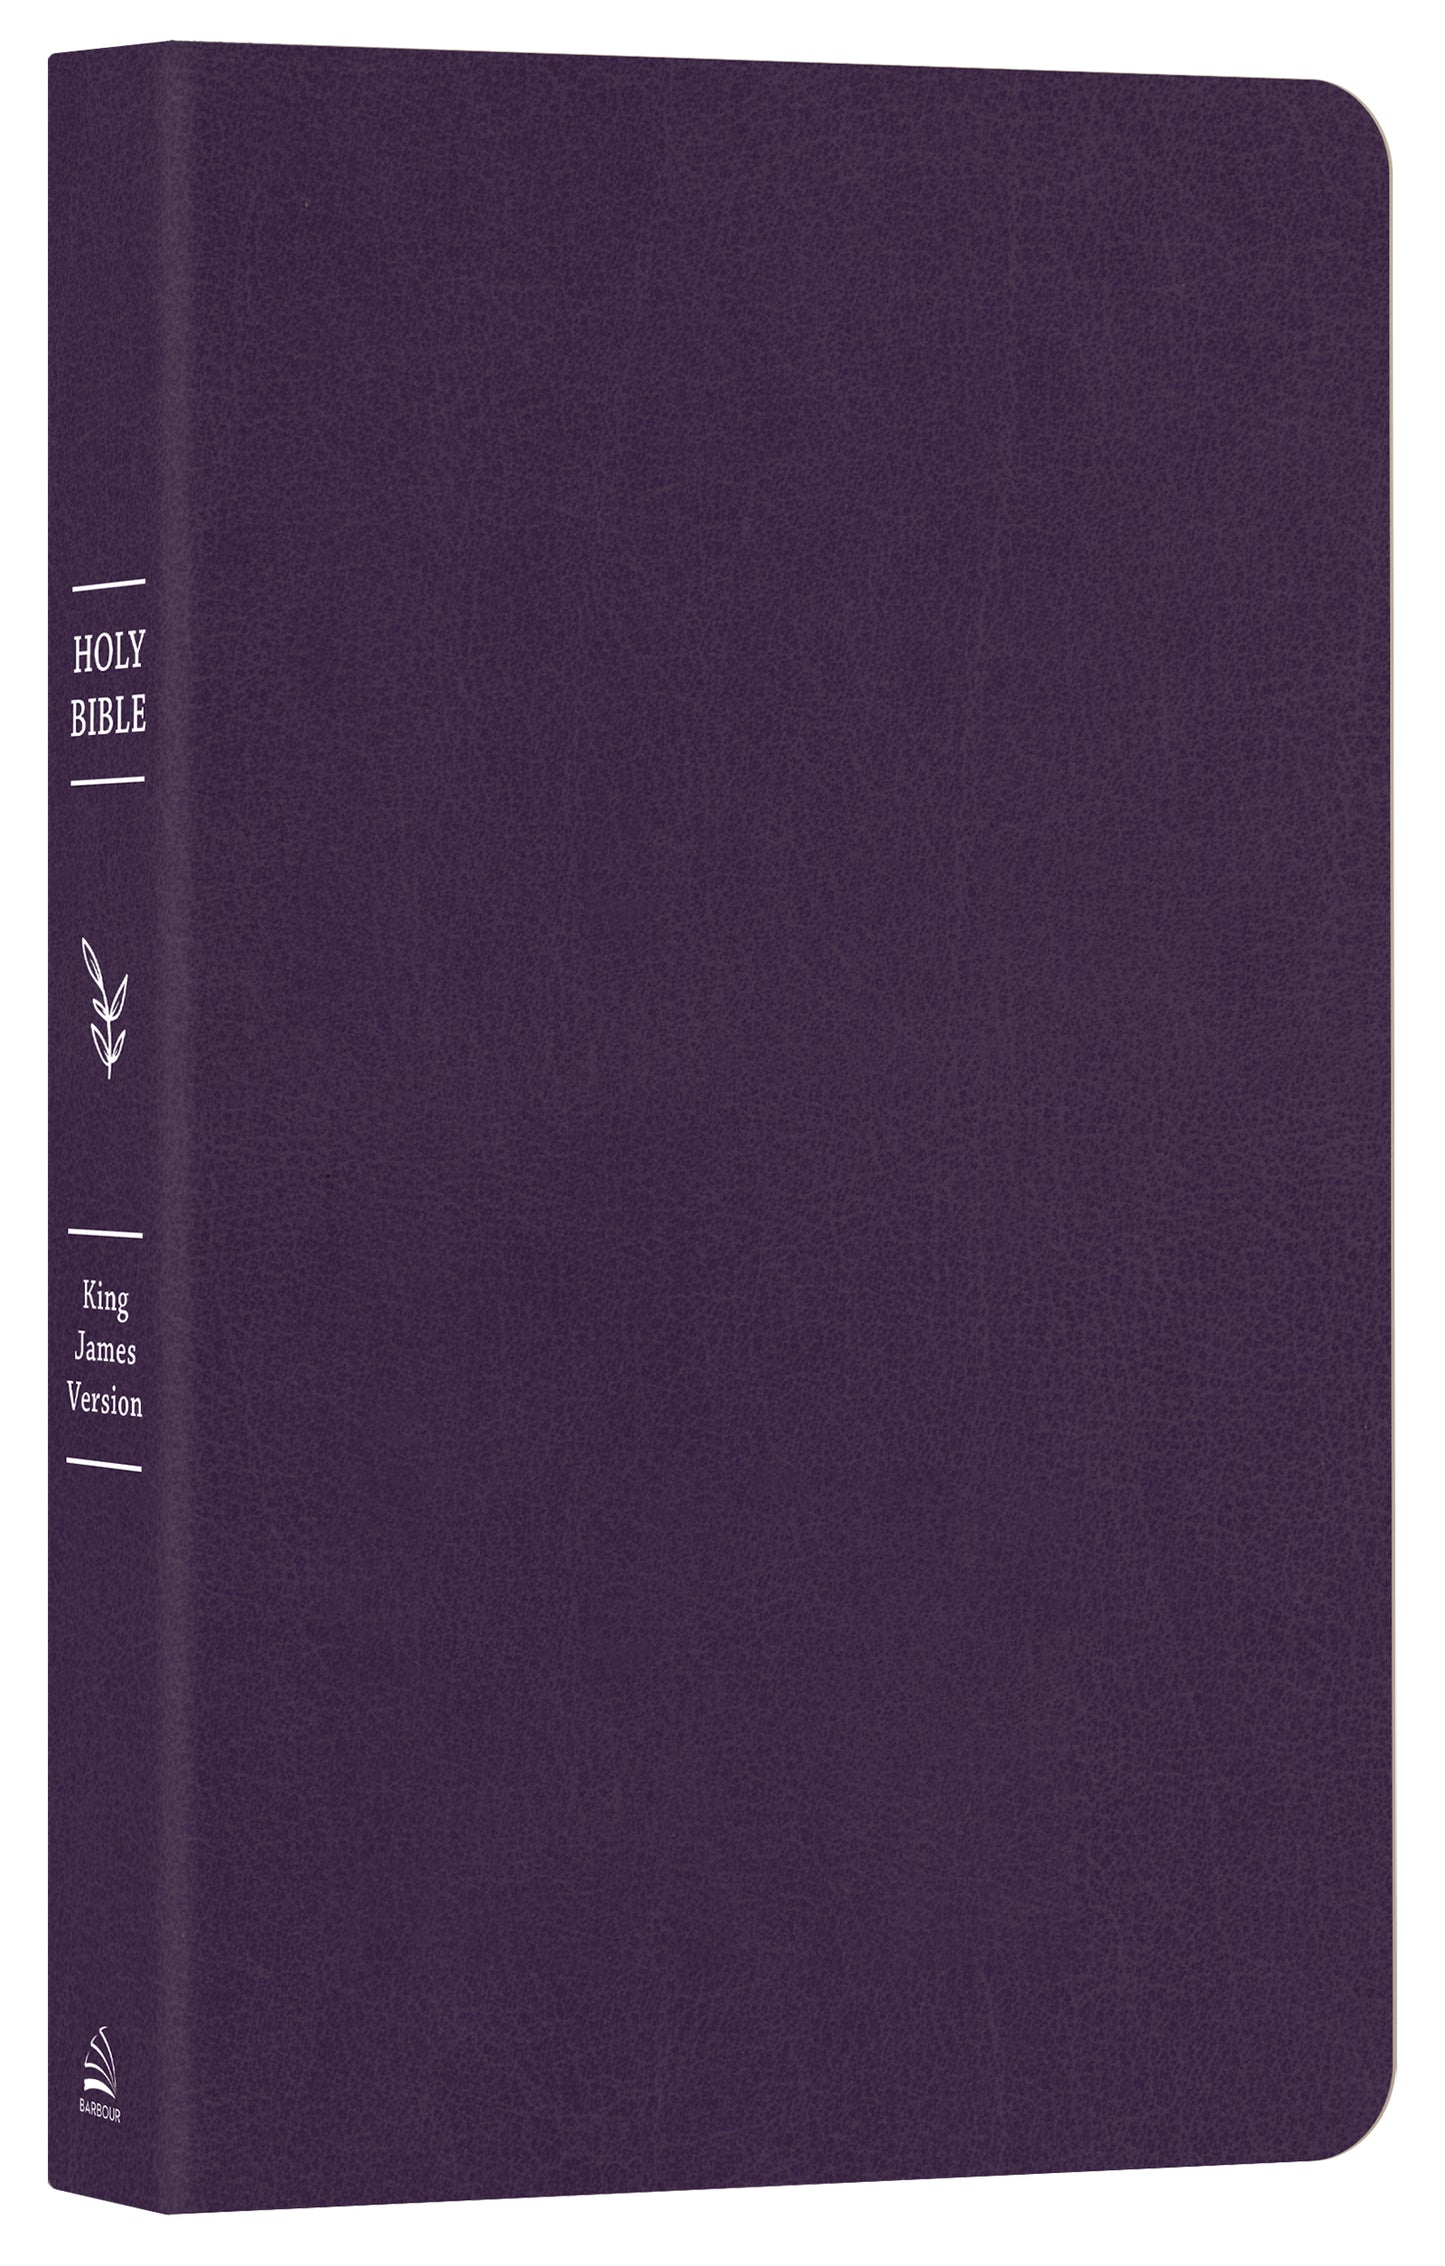 The Go-Anywhere KJV Bible for Young Women [Plum Patch]